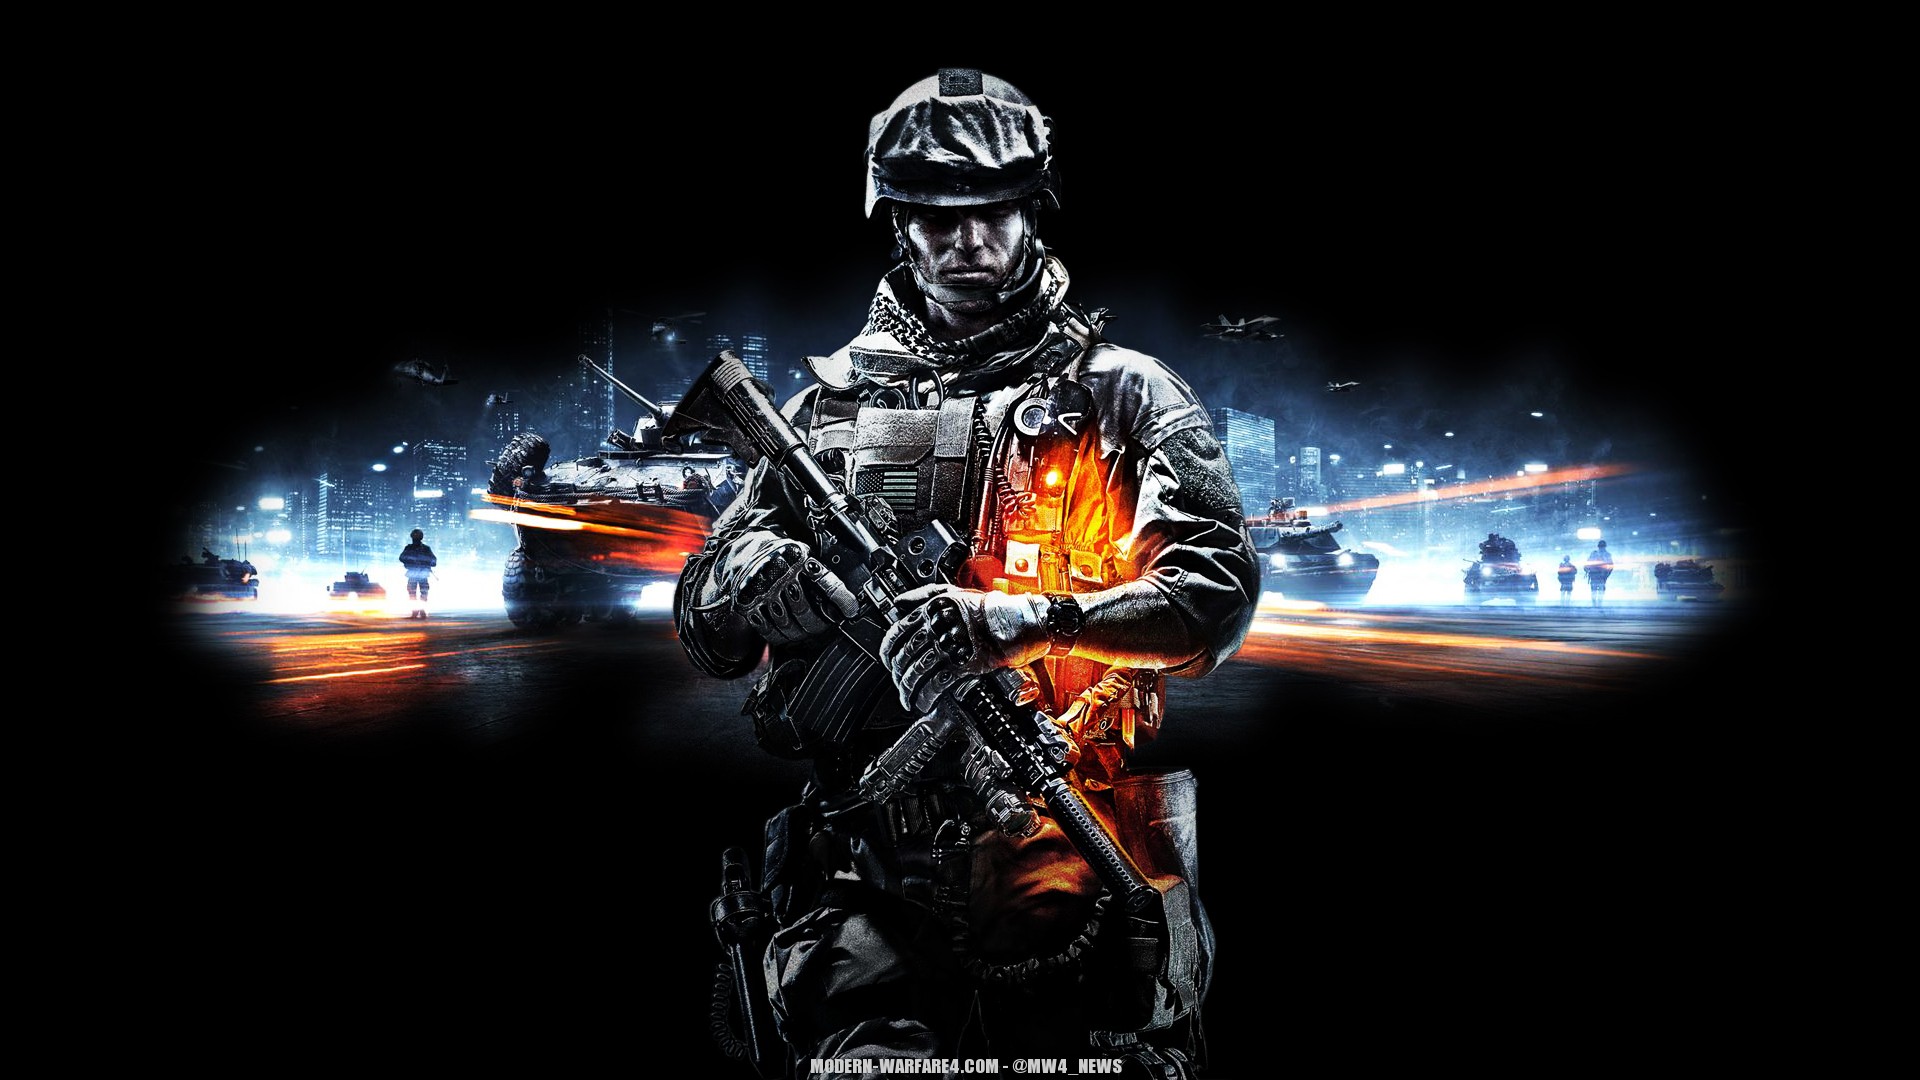 battlefield 3 wallpaper hd,pc game,soldier,darkness,personal protective equipment,movie